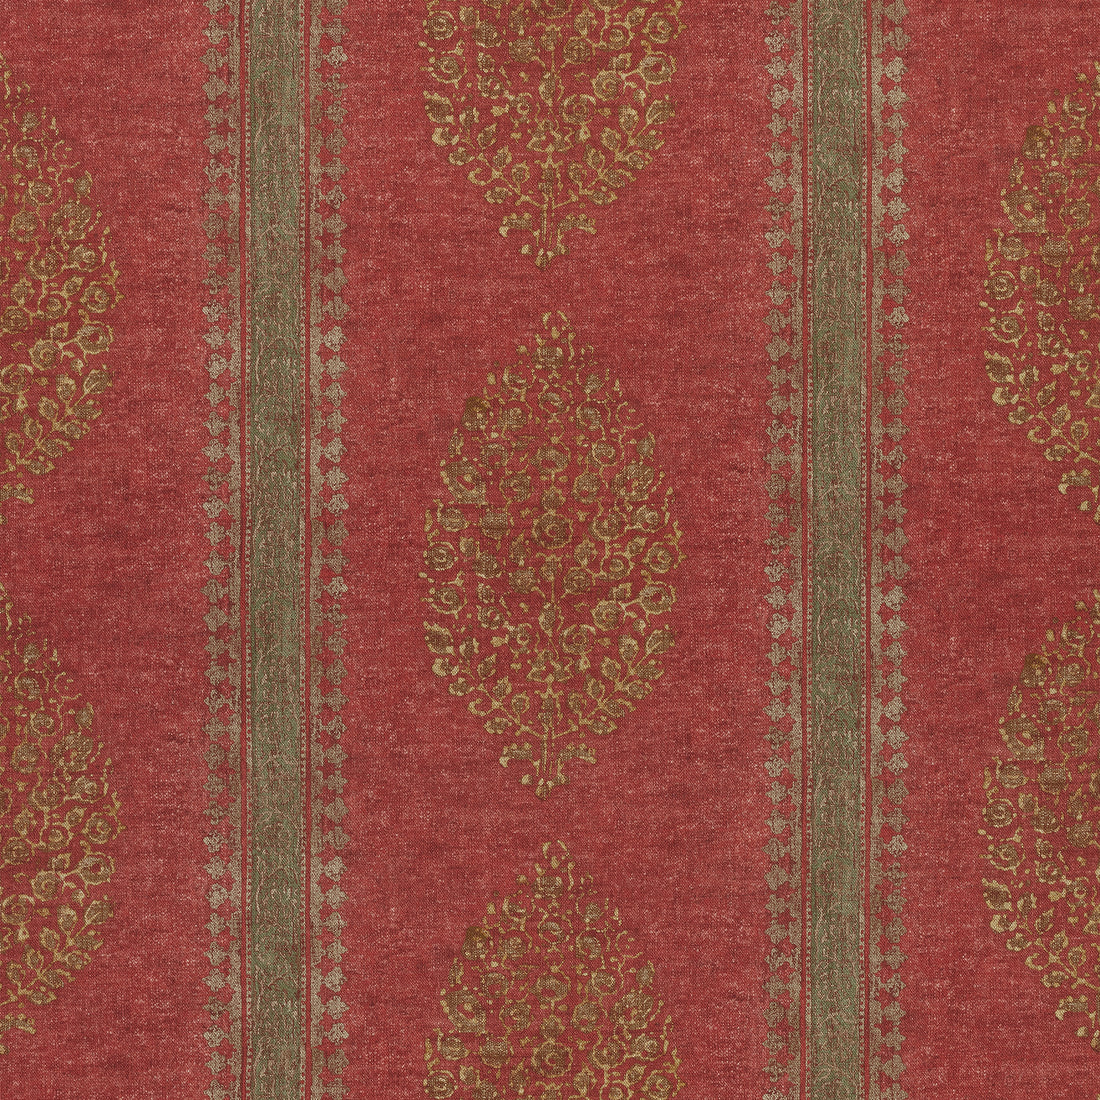 Chappana fabric in red color - pattern number F910237 - by Thibaut in the Colony collection